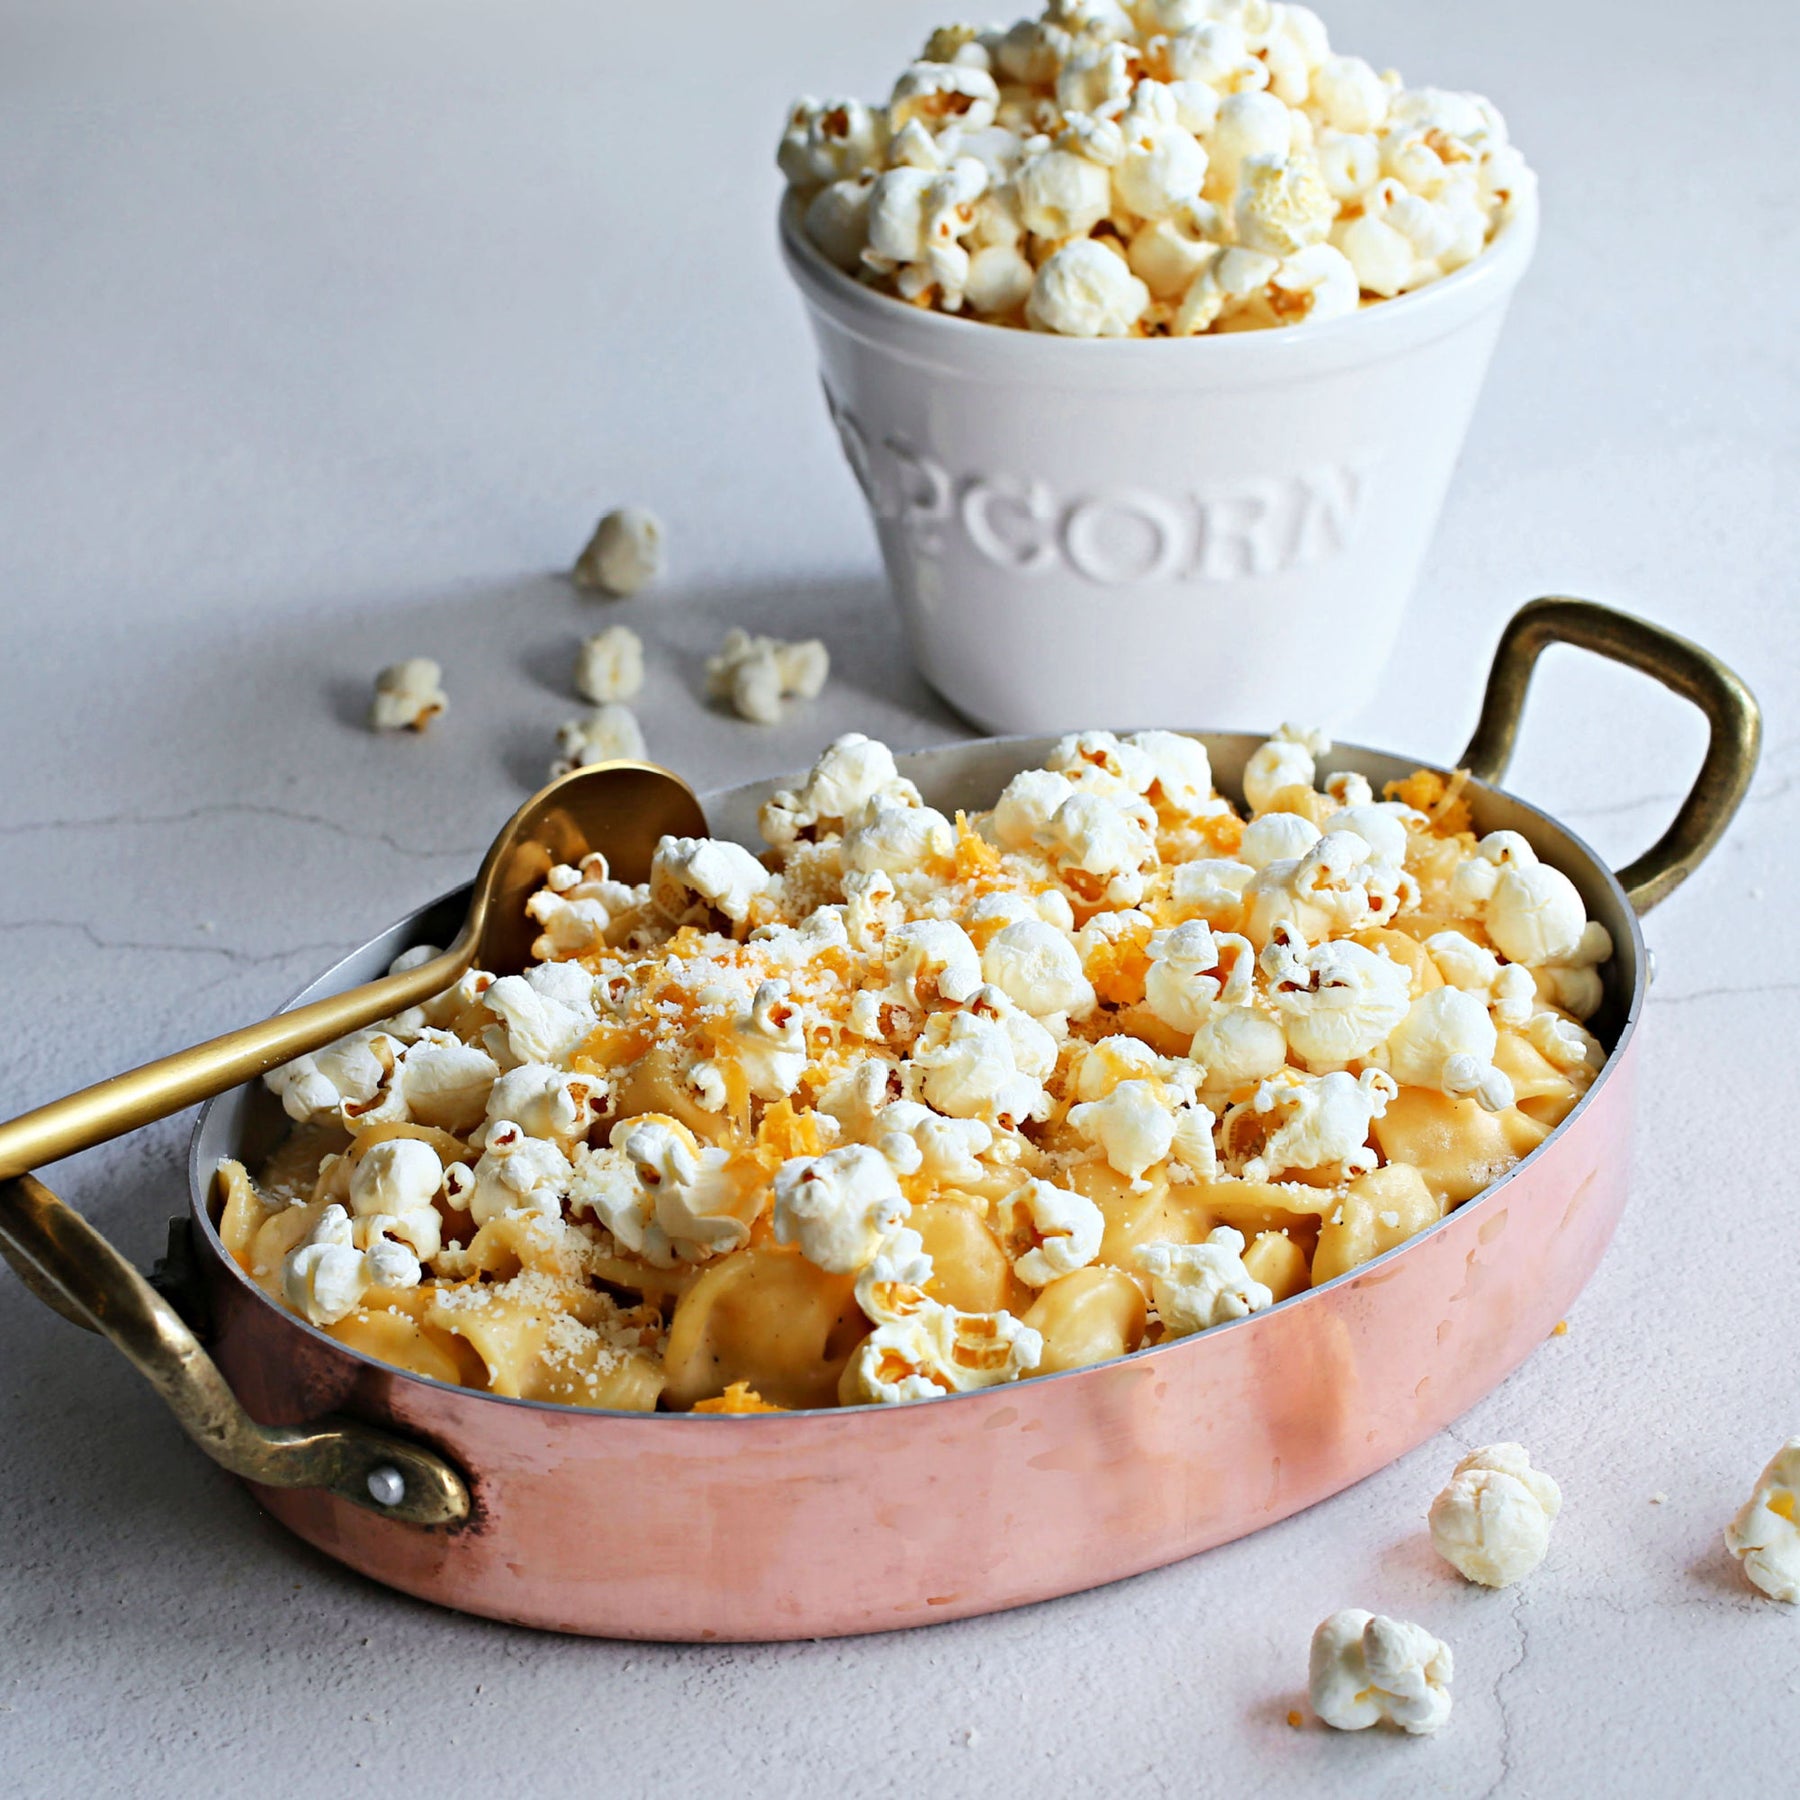 Popcorn Topped Mac and Cheese